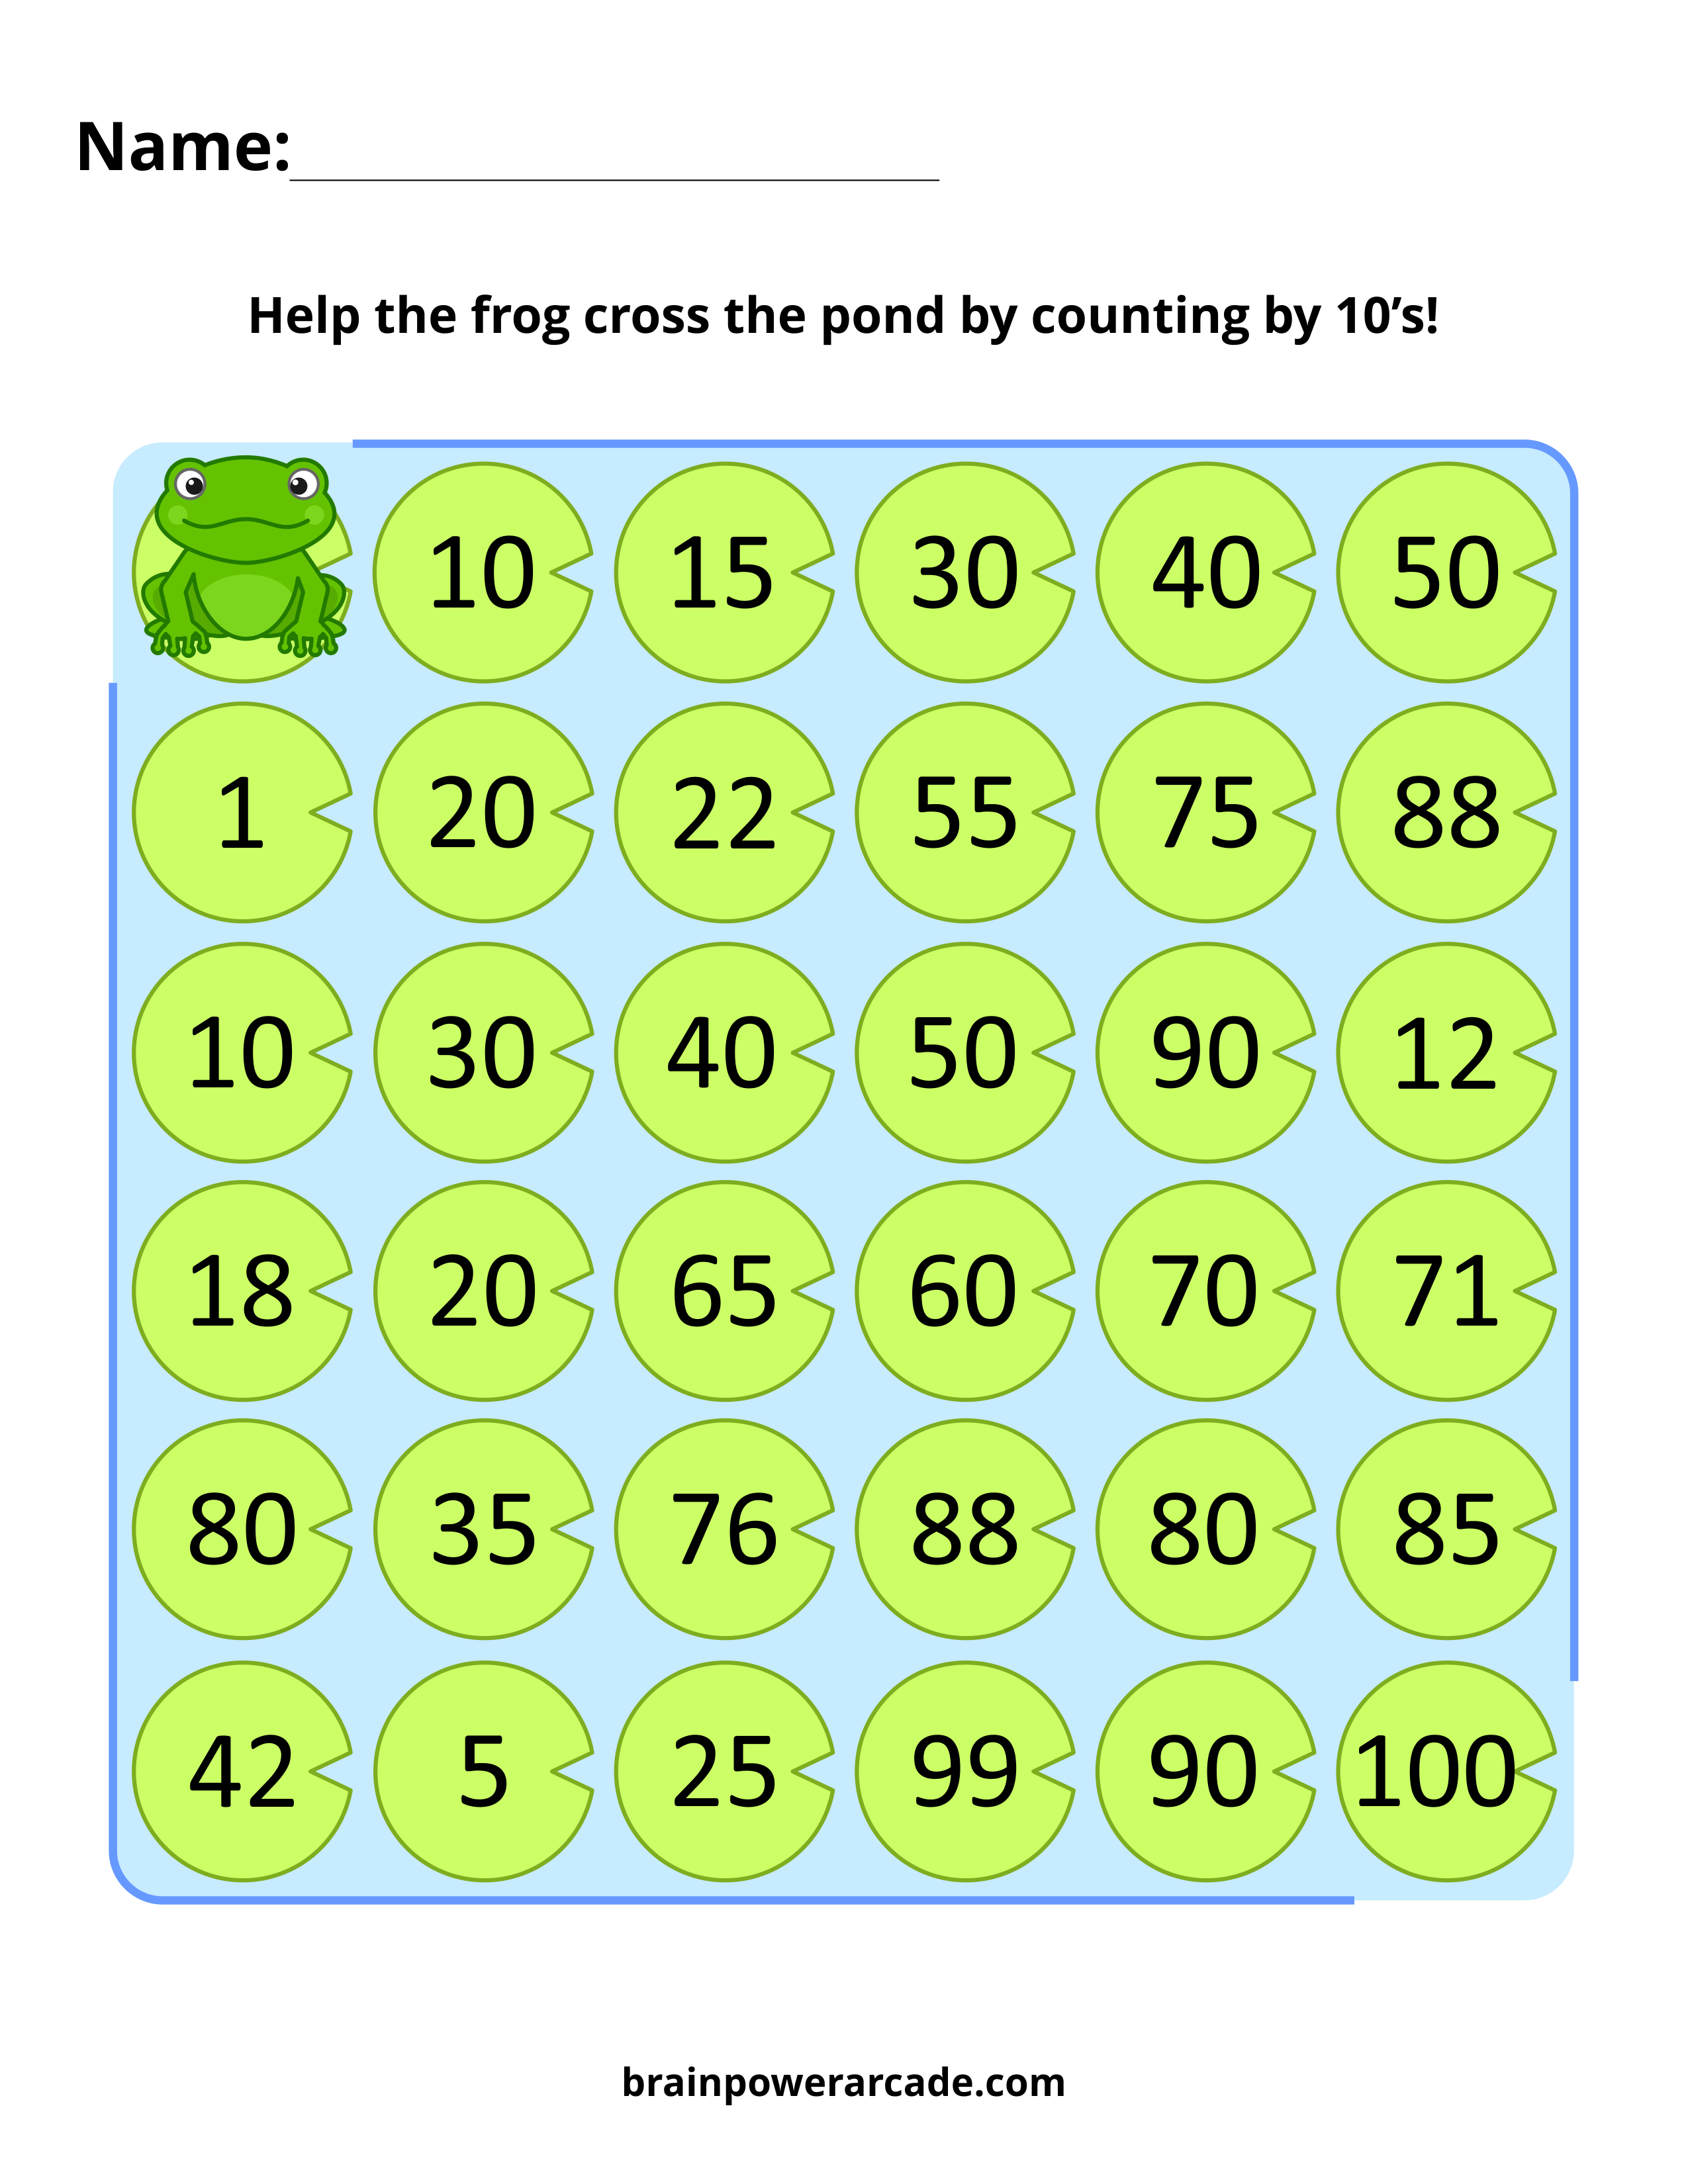 Counting by 10's